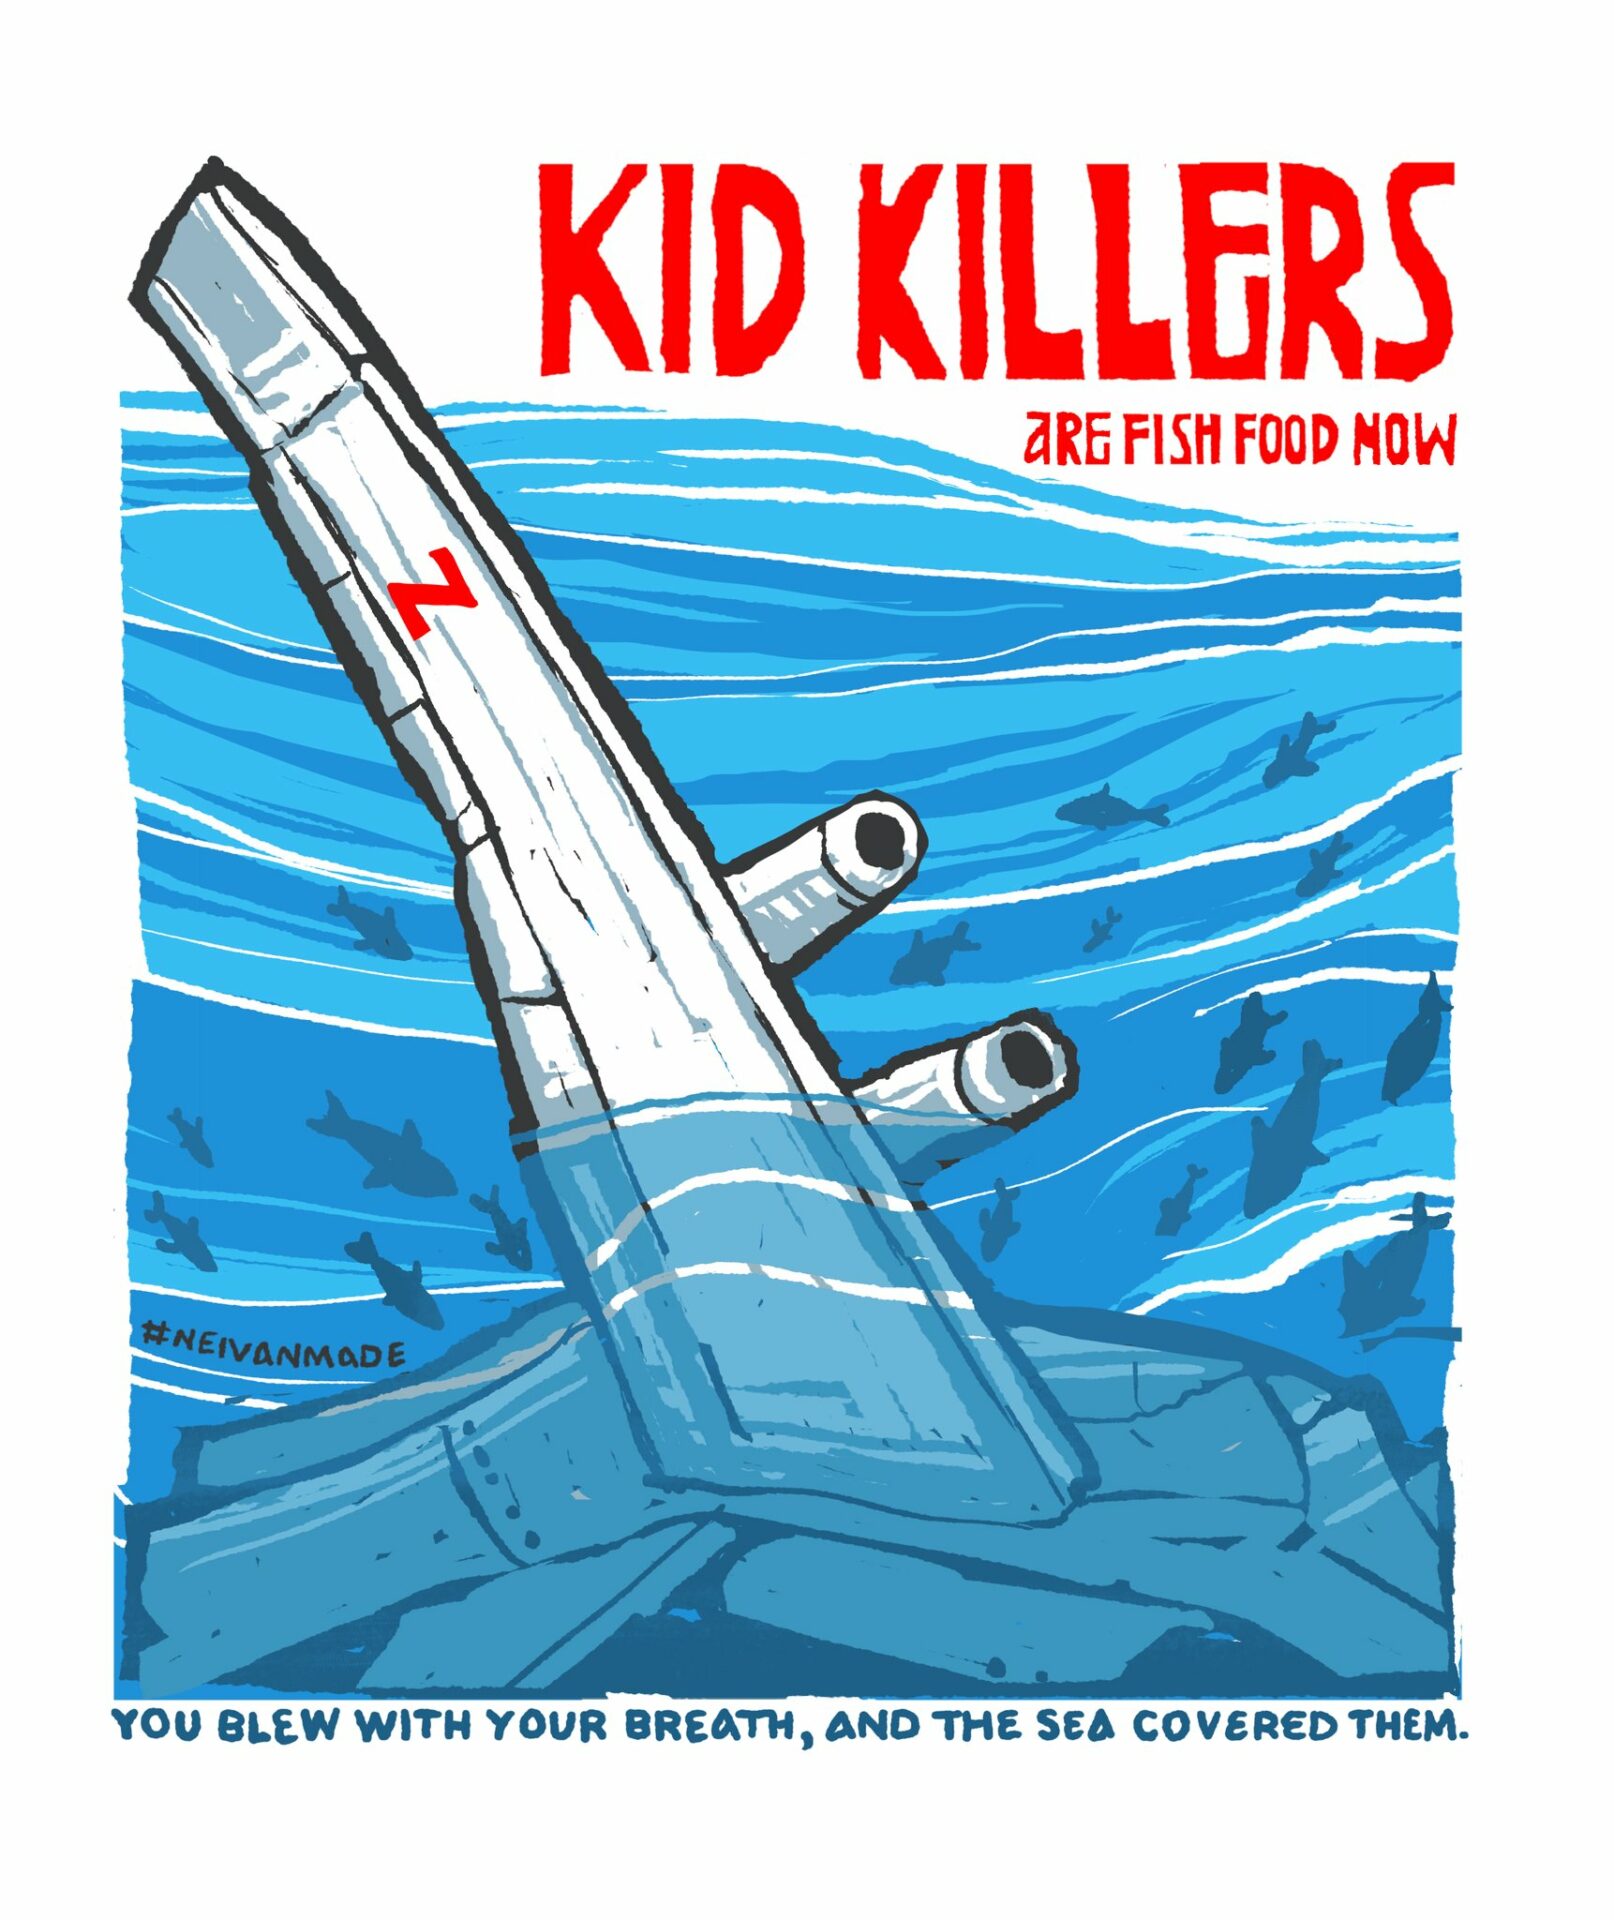 A painting by NEIVANMADE entitled and captions "Kid Killers: Are Fish Food Now." That is painted in red in the upper right corner on a white background. Below it is blue water with a Russian navy ship or plane sinking below the waves. The wreckage has the "Z" symbol painted on it in red. Written below that in blue across the bottom white border is: "You below with your breath, and the sea covered them."